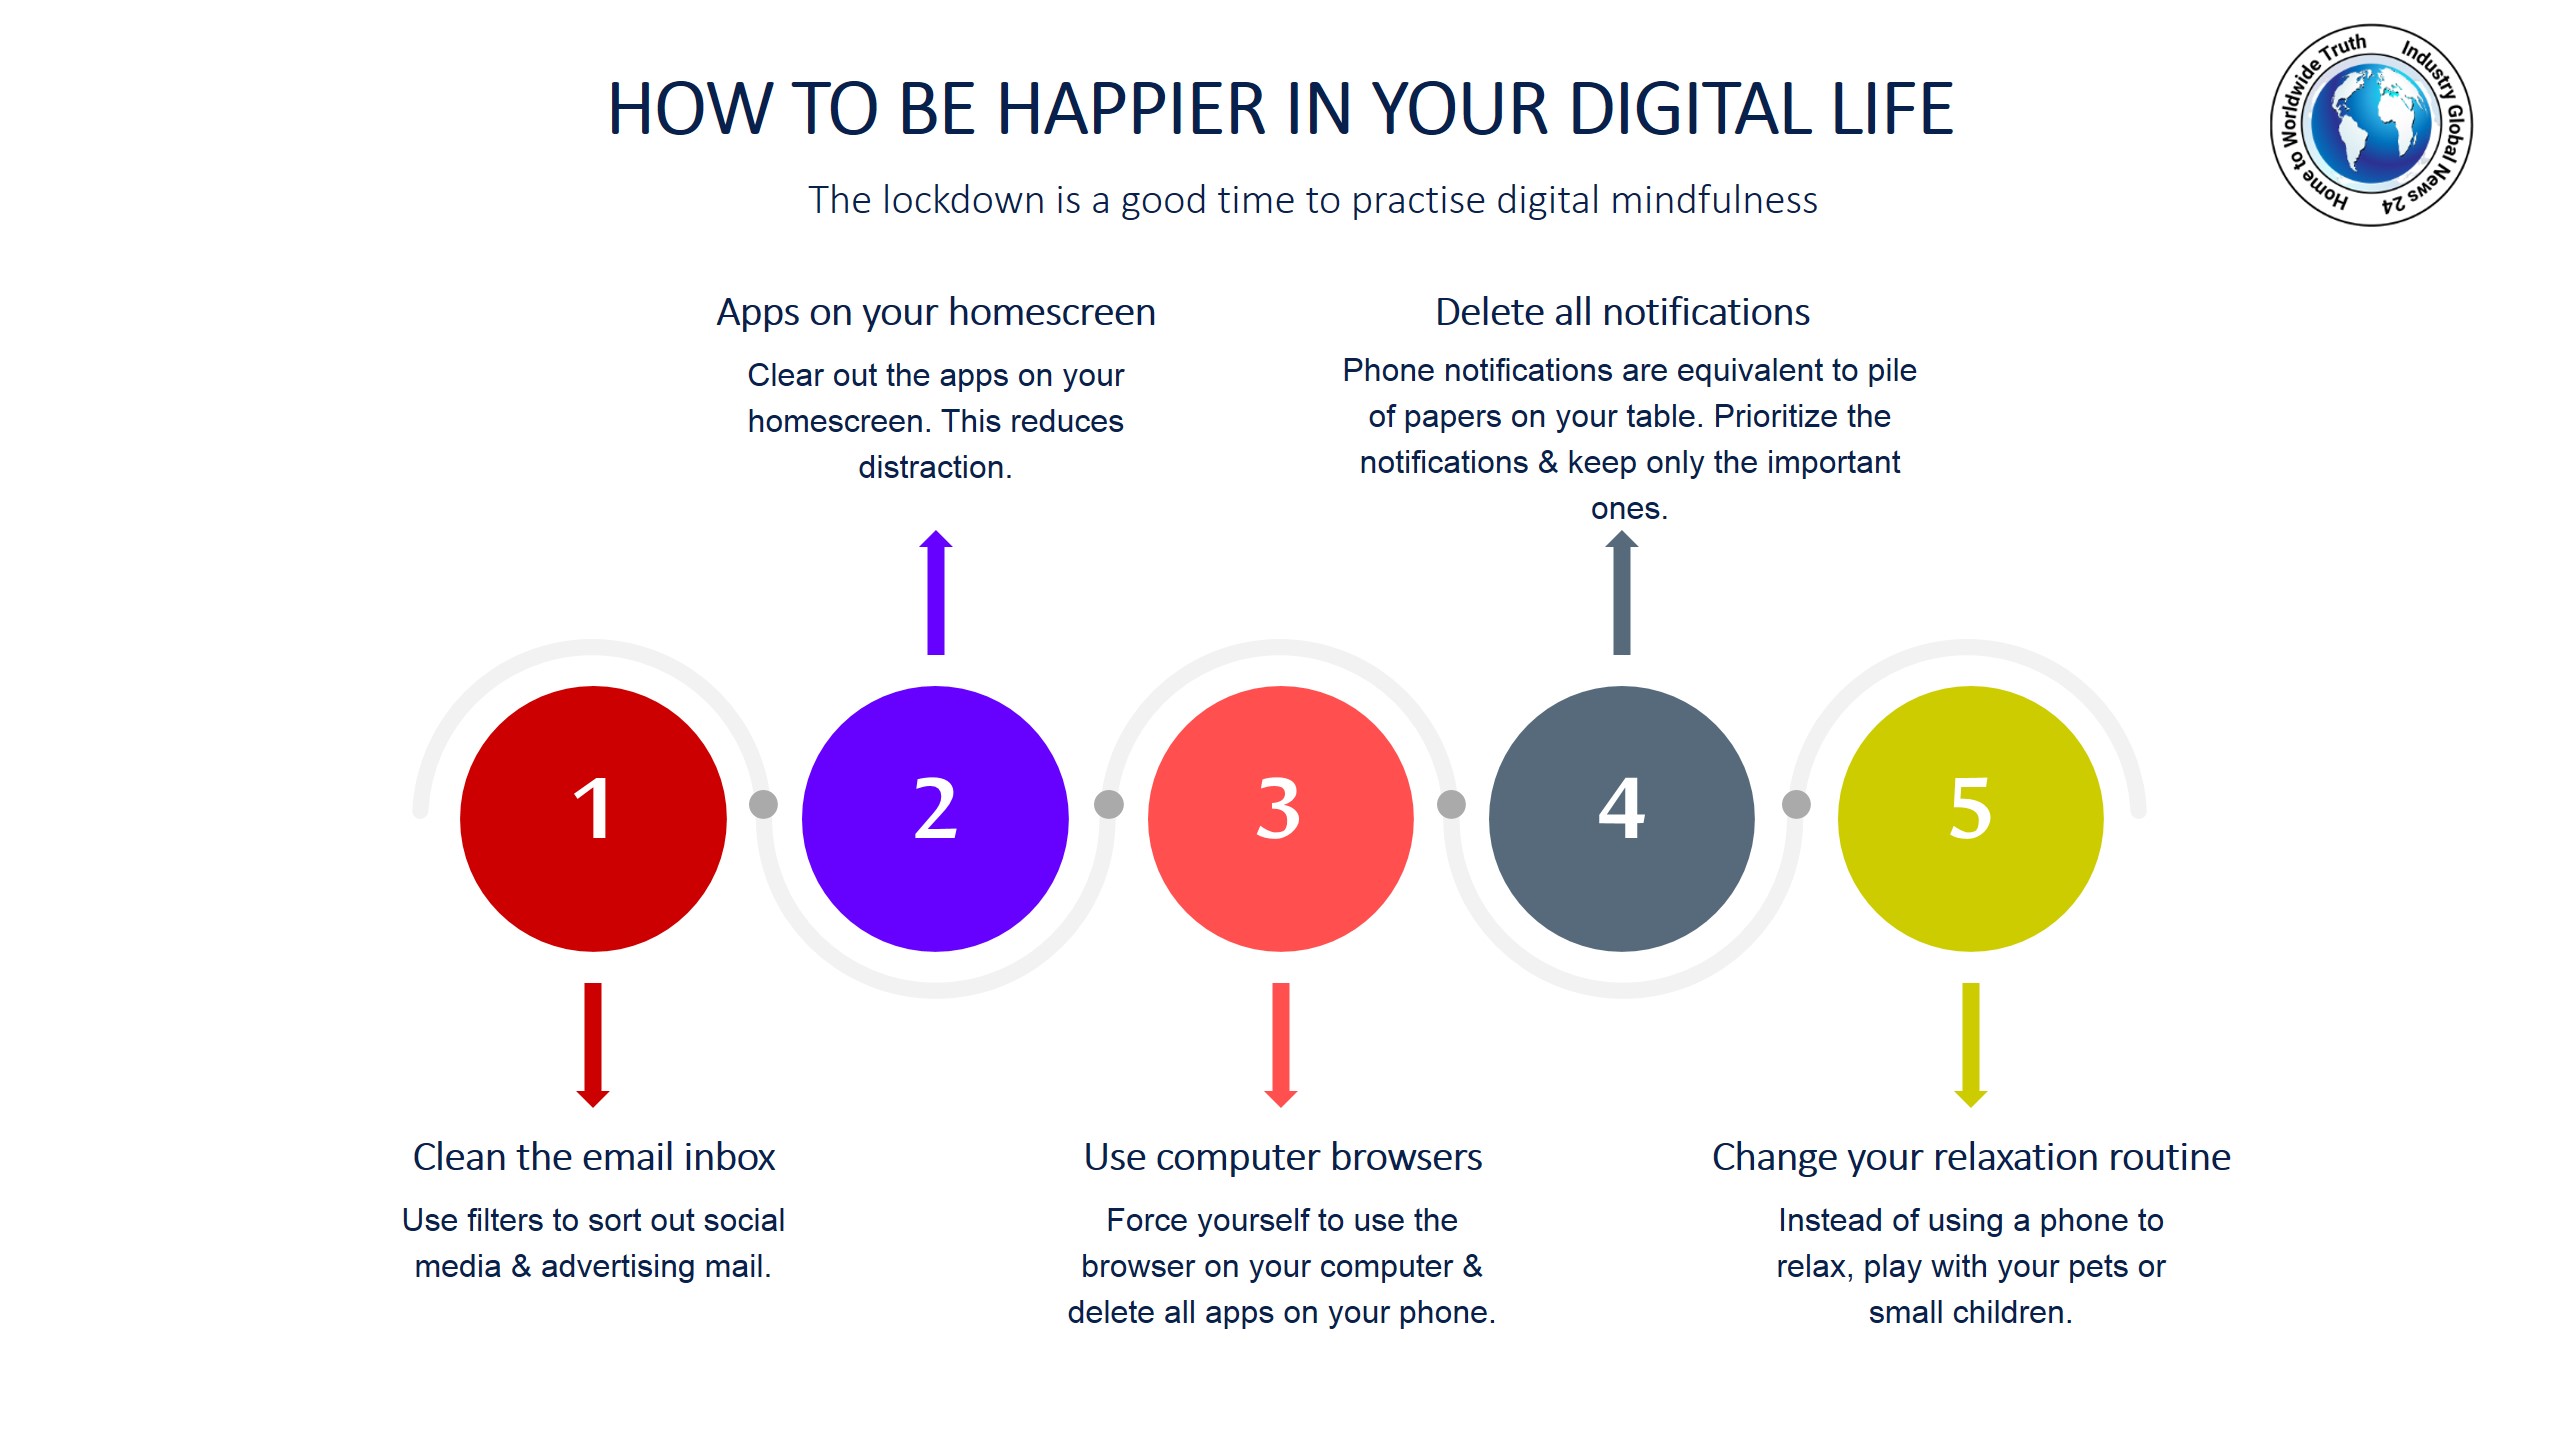 How to be happier in your digital life